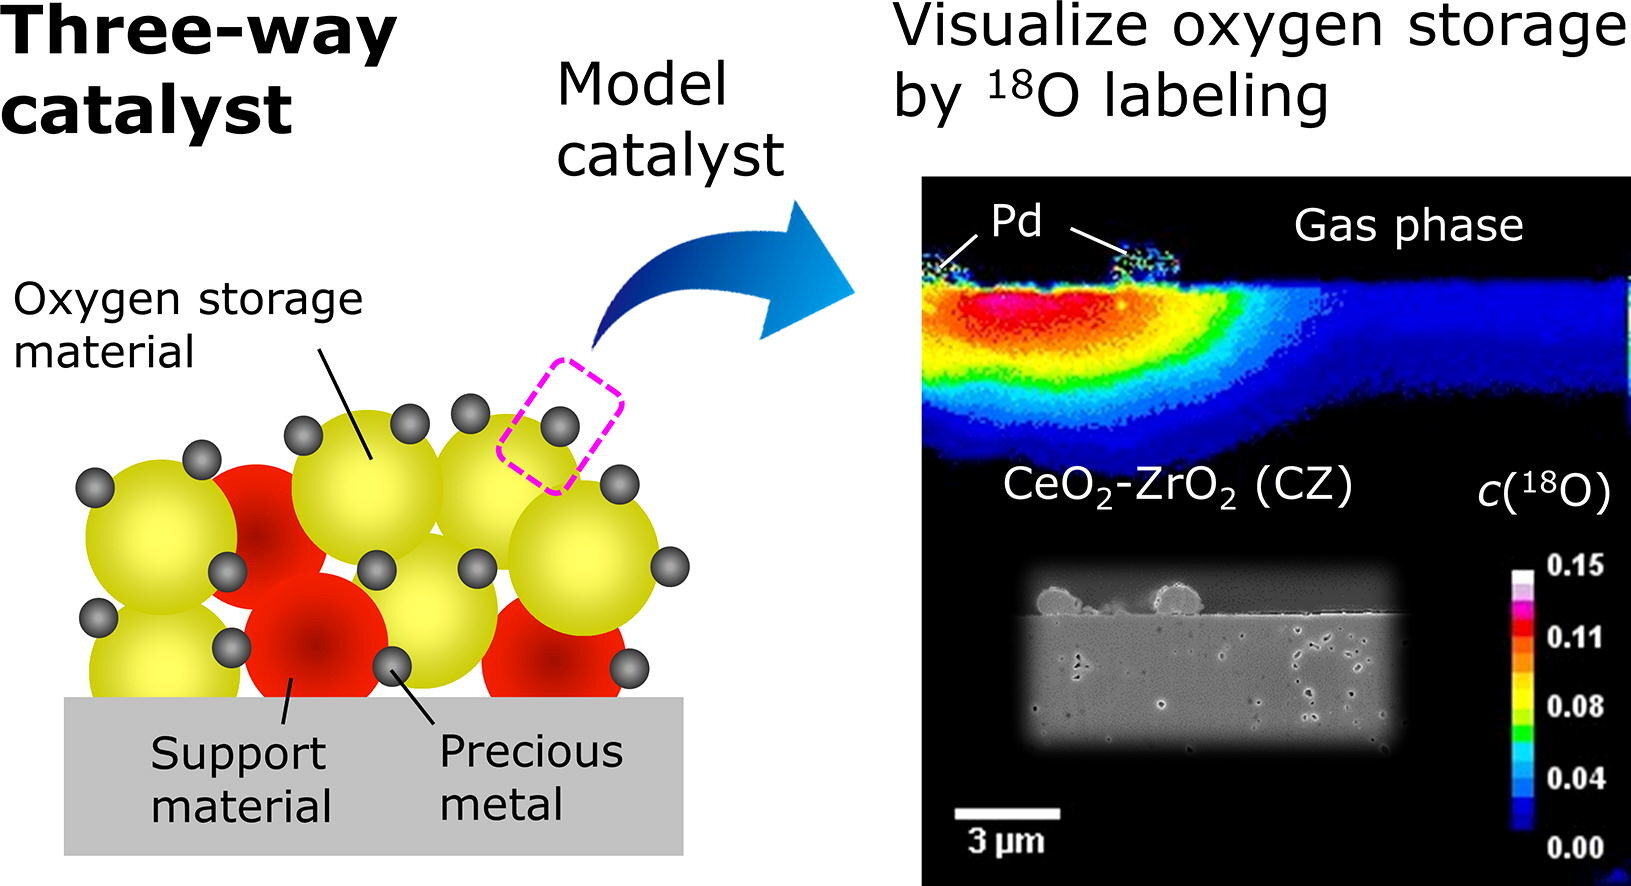 Looking at oxygen storage dynamics in three-way catalysts